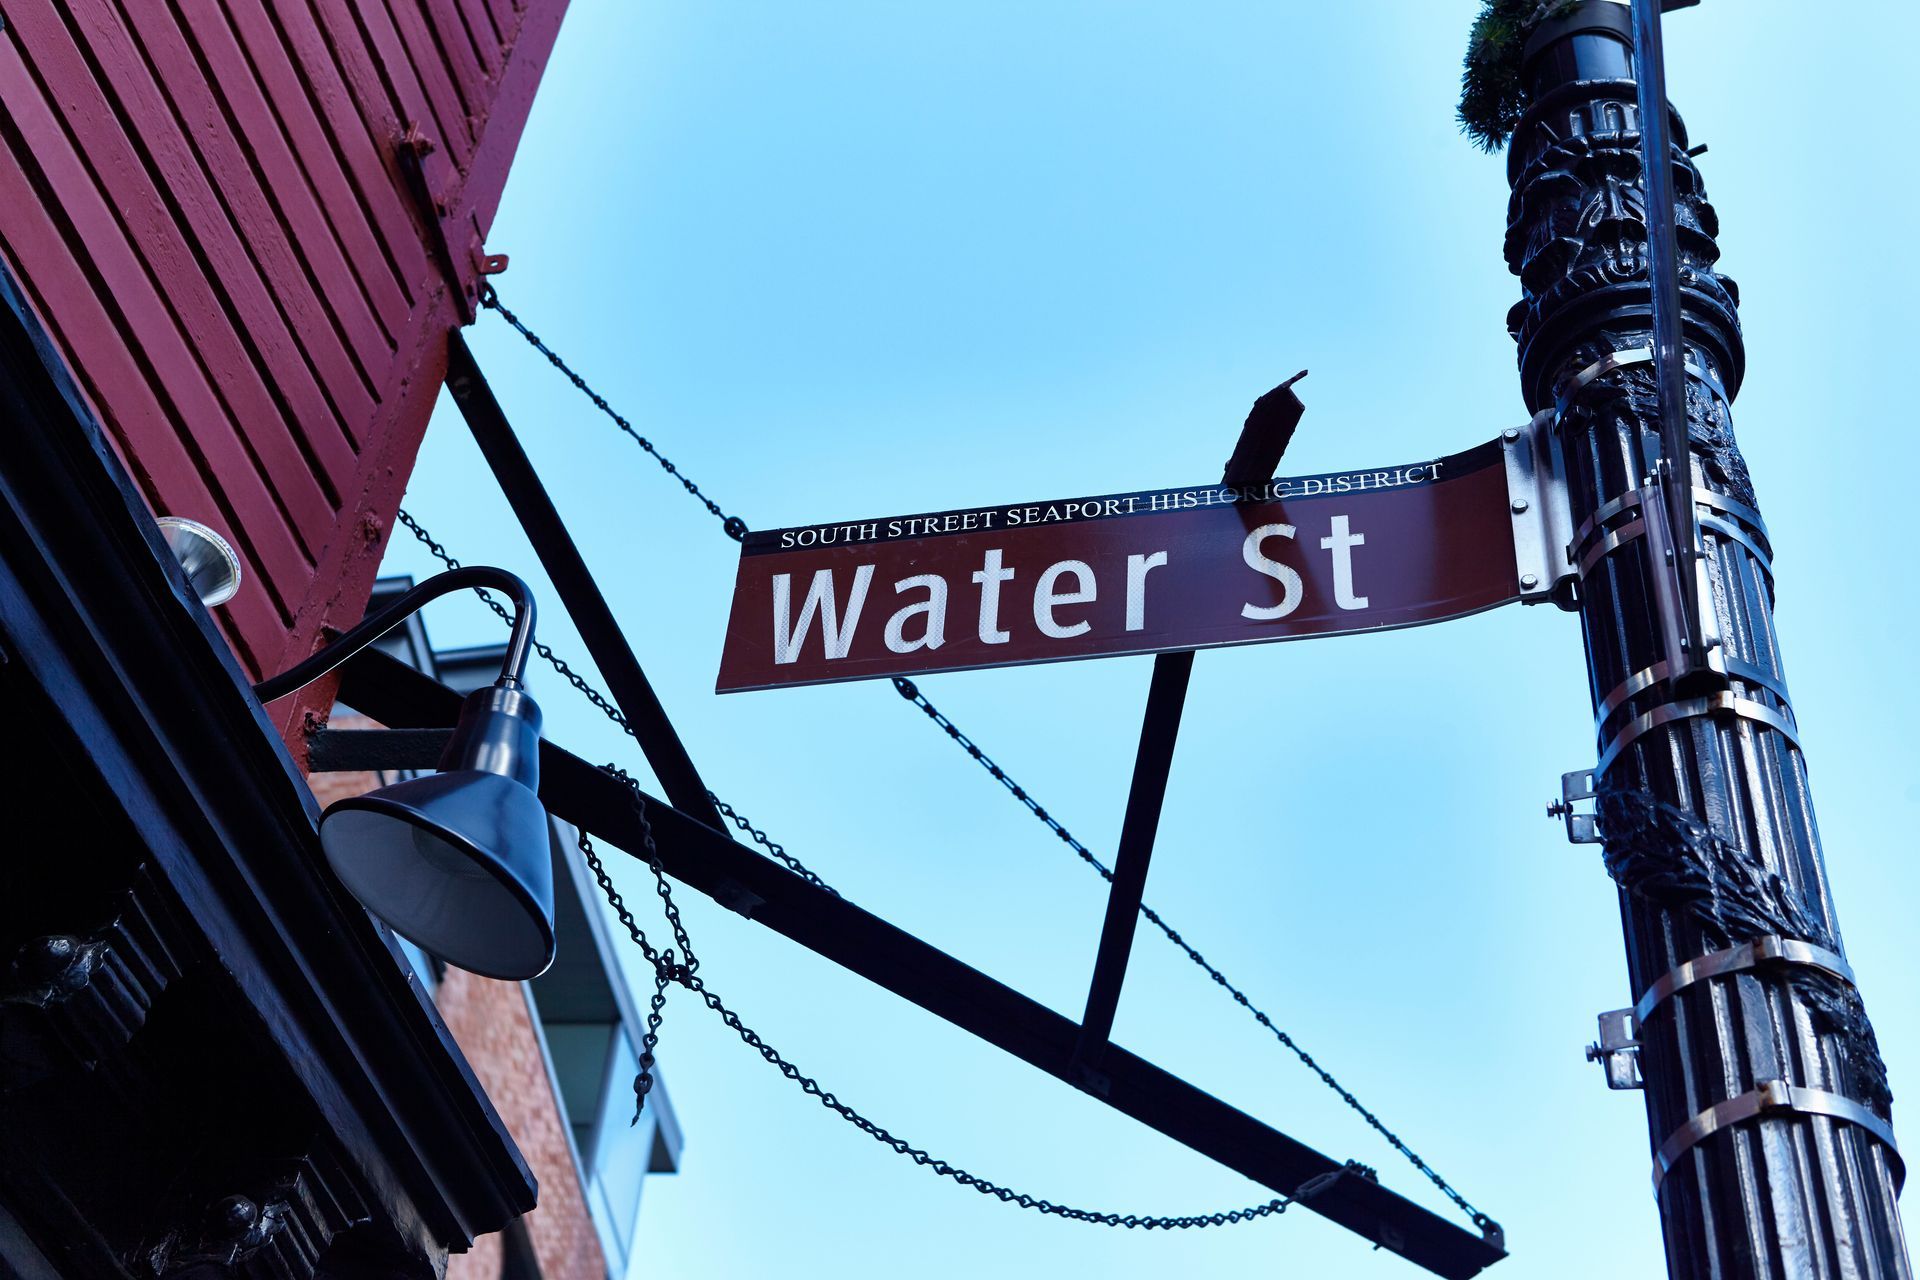 A street sign for water st hangs from a pole